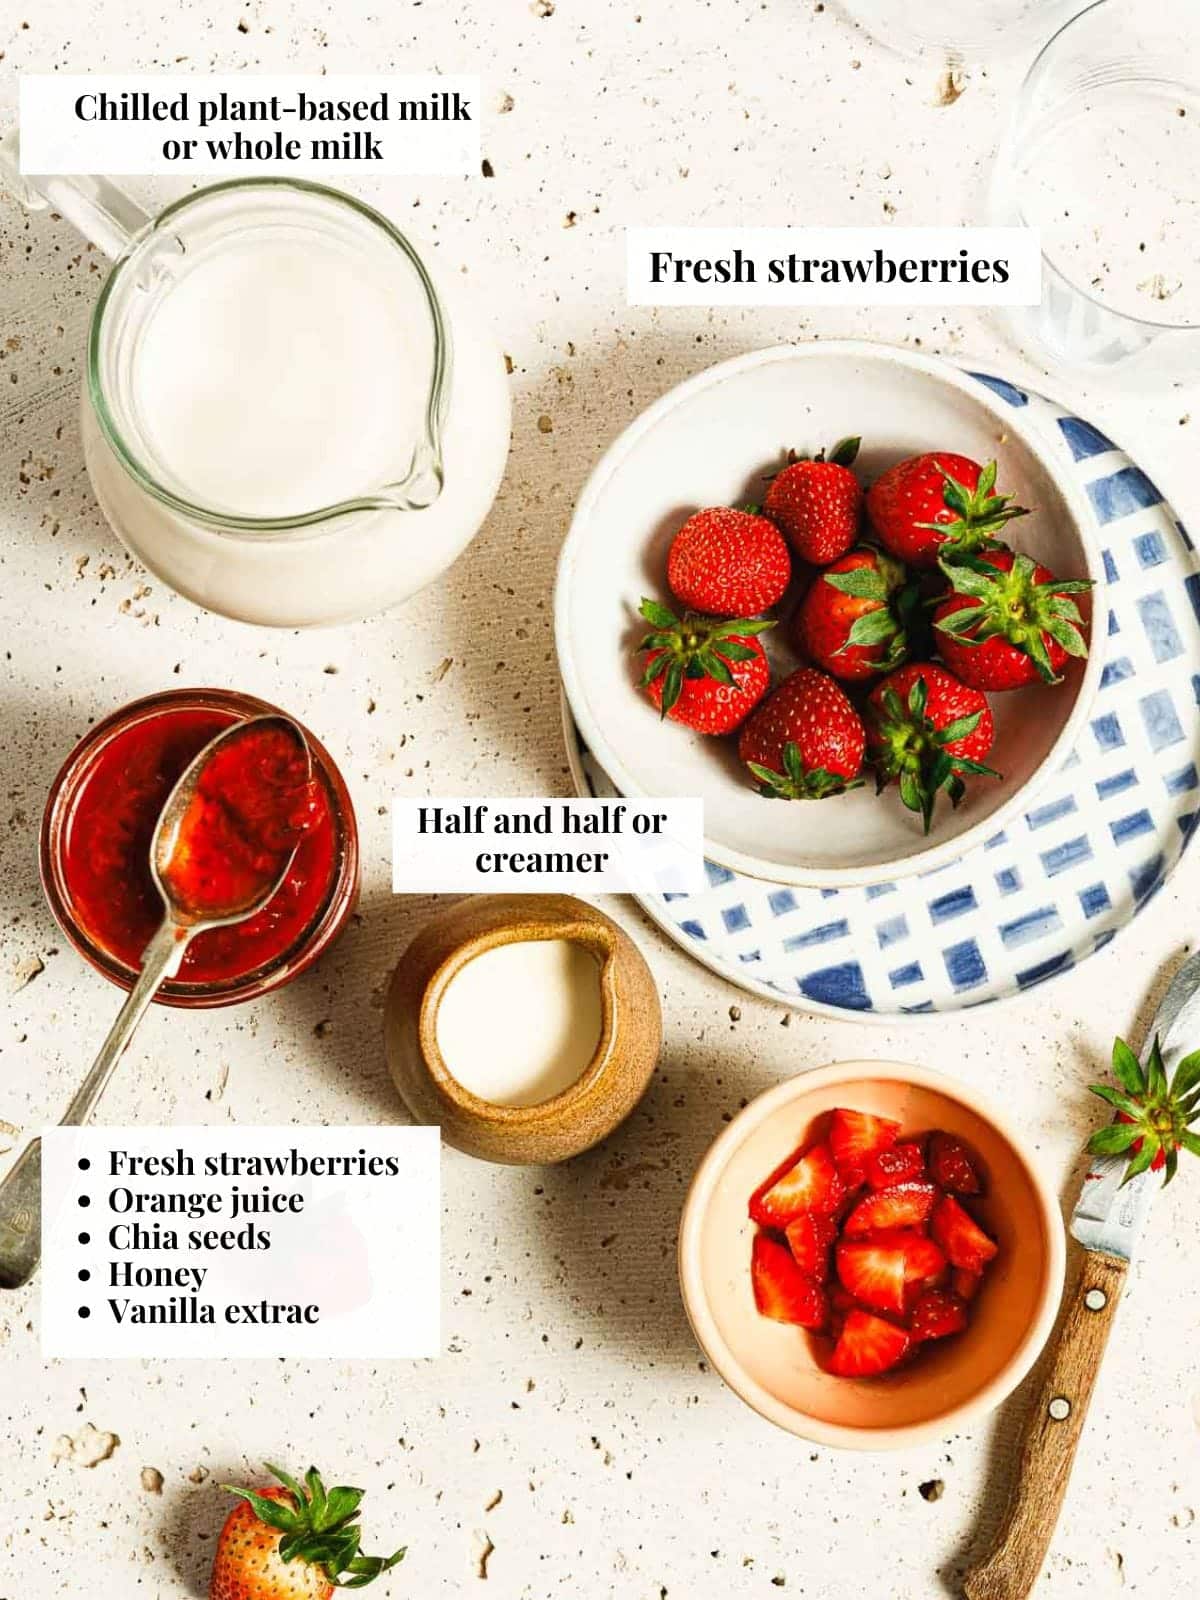 Ingredient photo shows fresh strawberries, strawberry compote, and cold milk used.